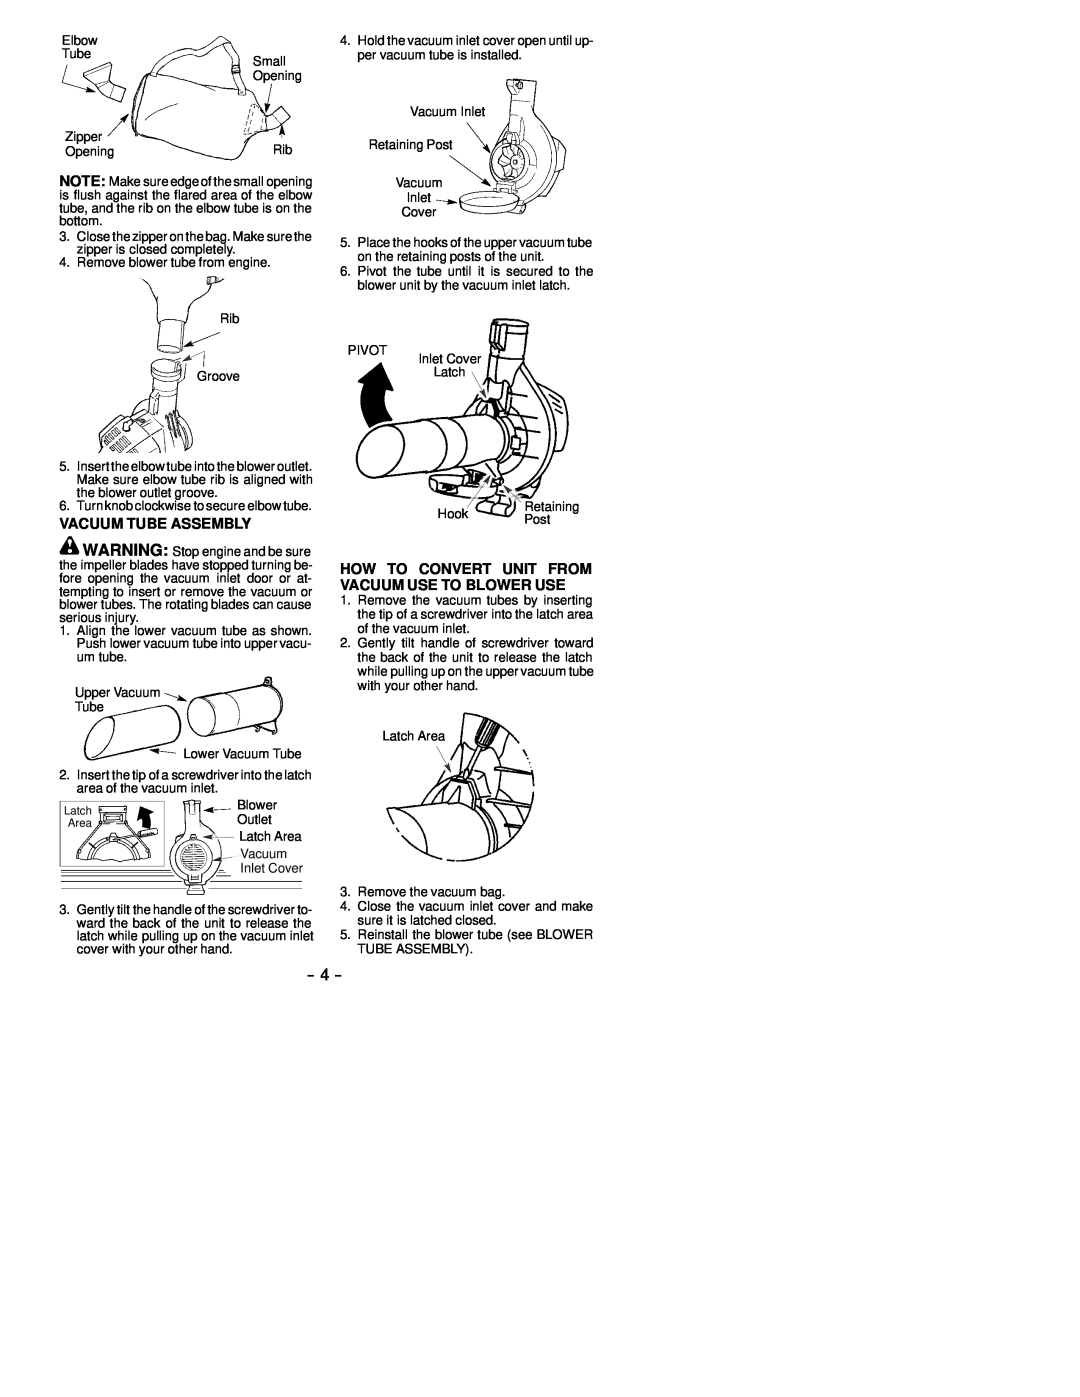 Poulan 530163808 instruction manual Vacuum Tube Assembly, How To Convert Unit From Vacuum Use To Blower Use 